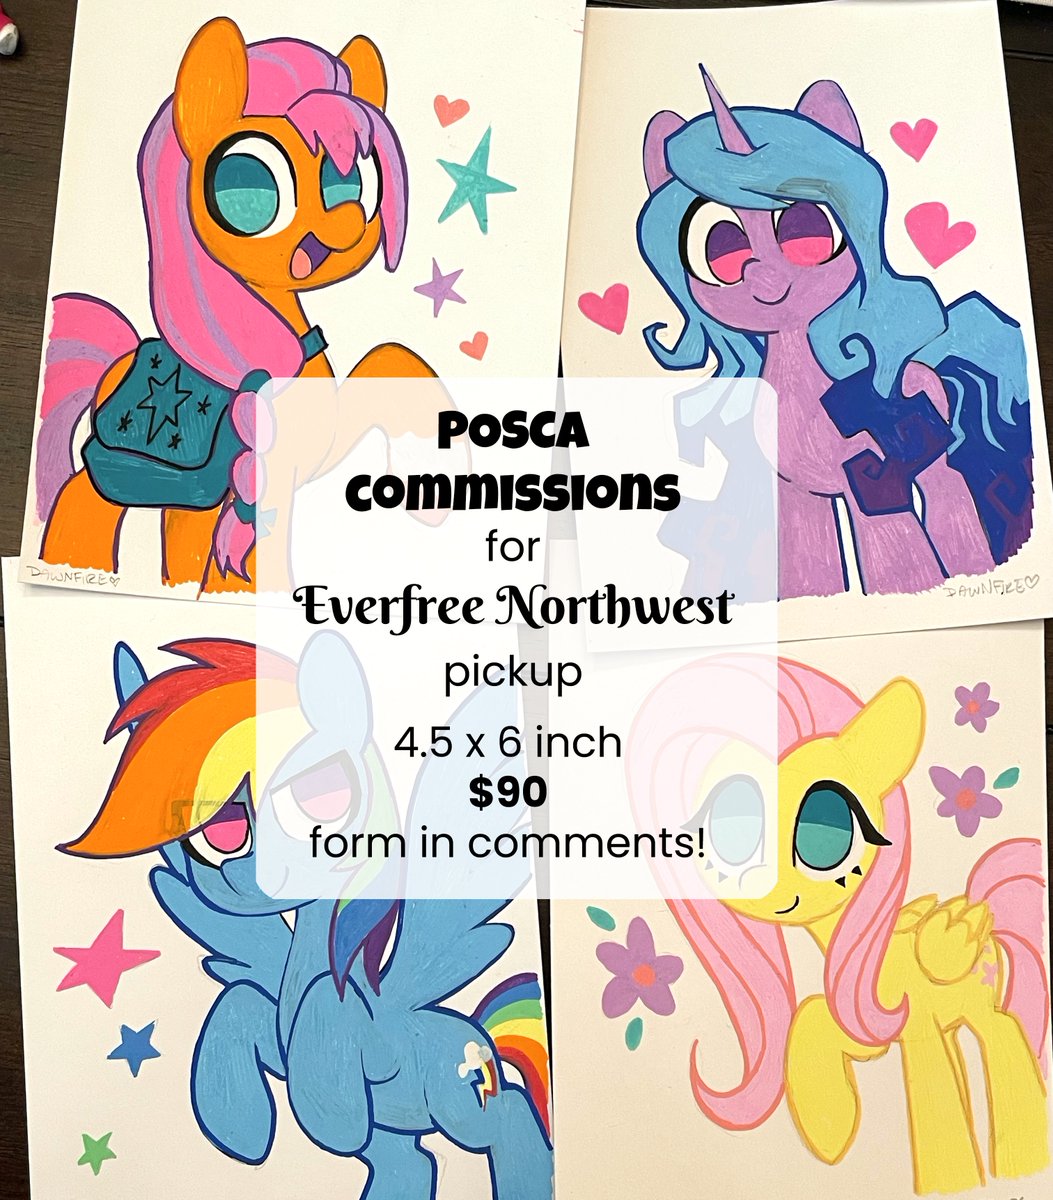 POSCA comms 4 PICKUP at @EverfreeNW 💚
pony-style characters only! OCs & canon fine! 